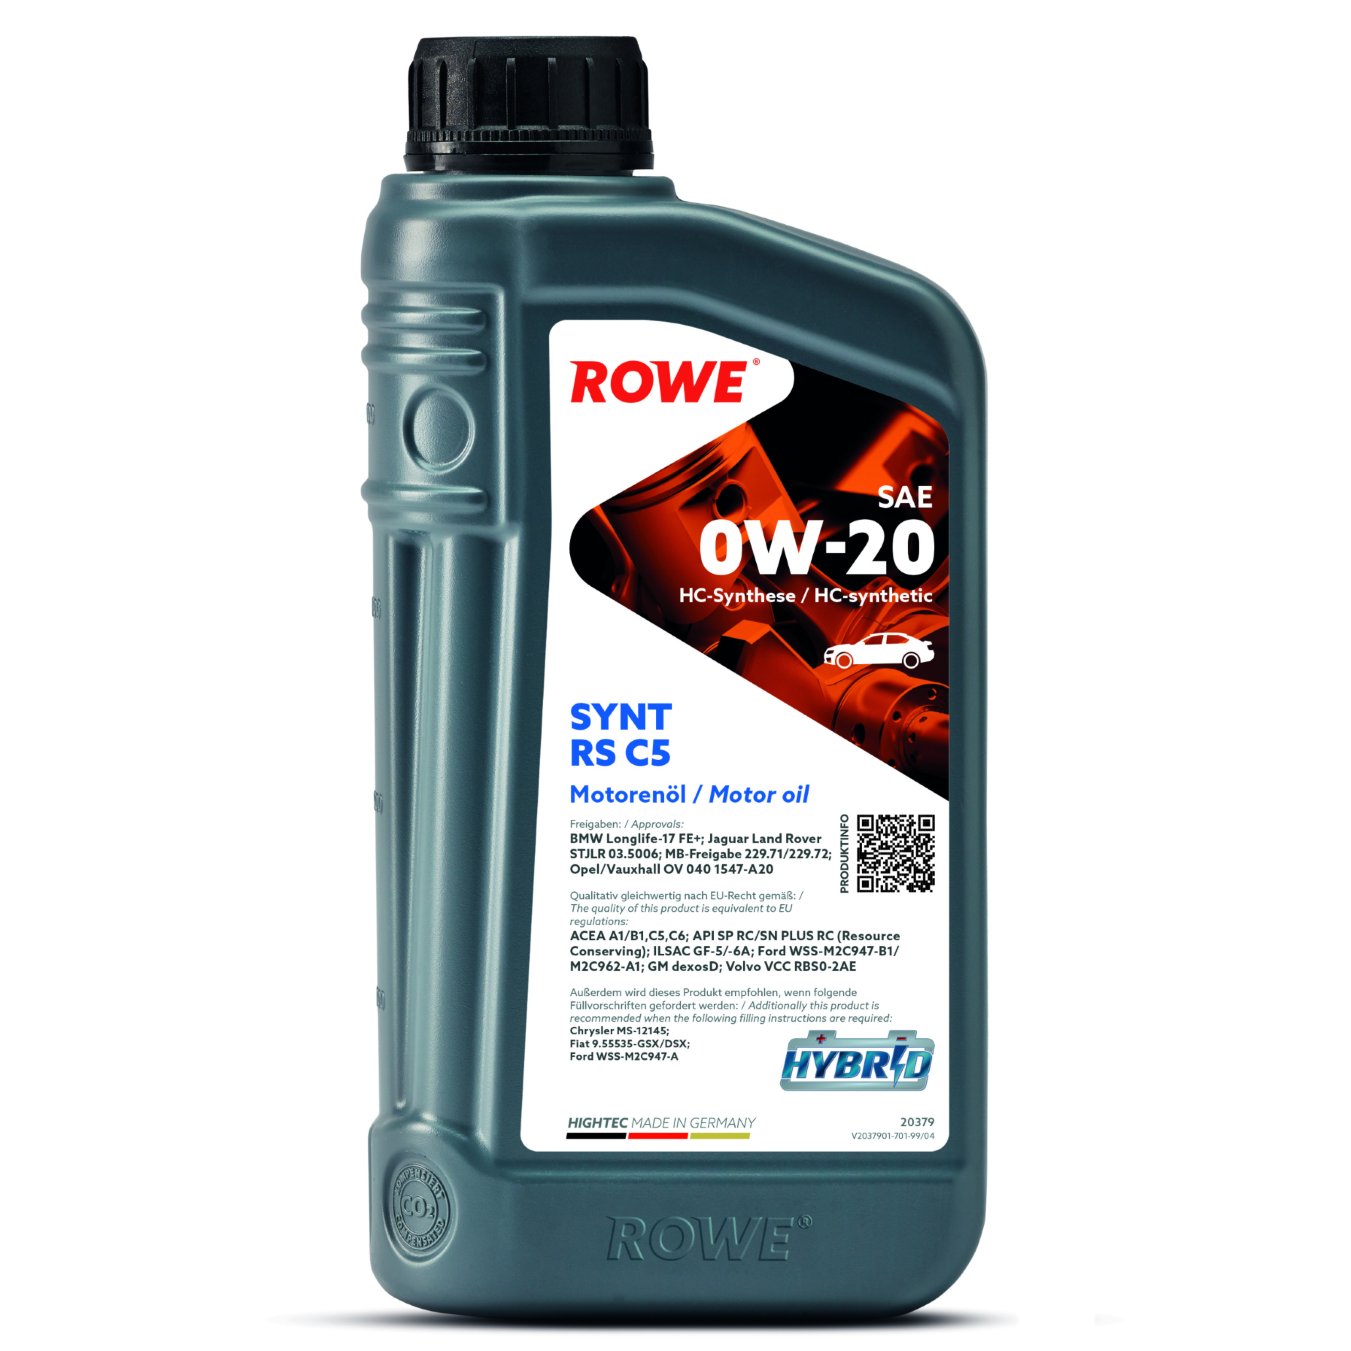 Моторное масло ROWE Synt RS C5 0W-20 1 л, 20379-0010-99